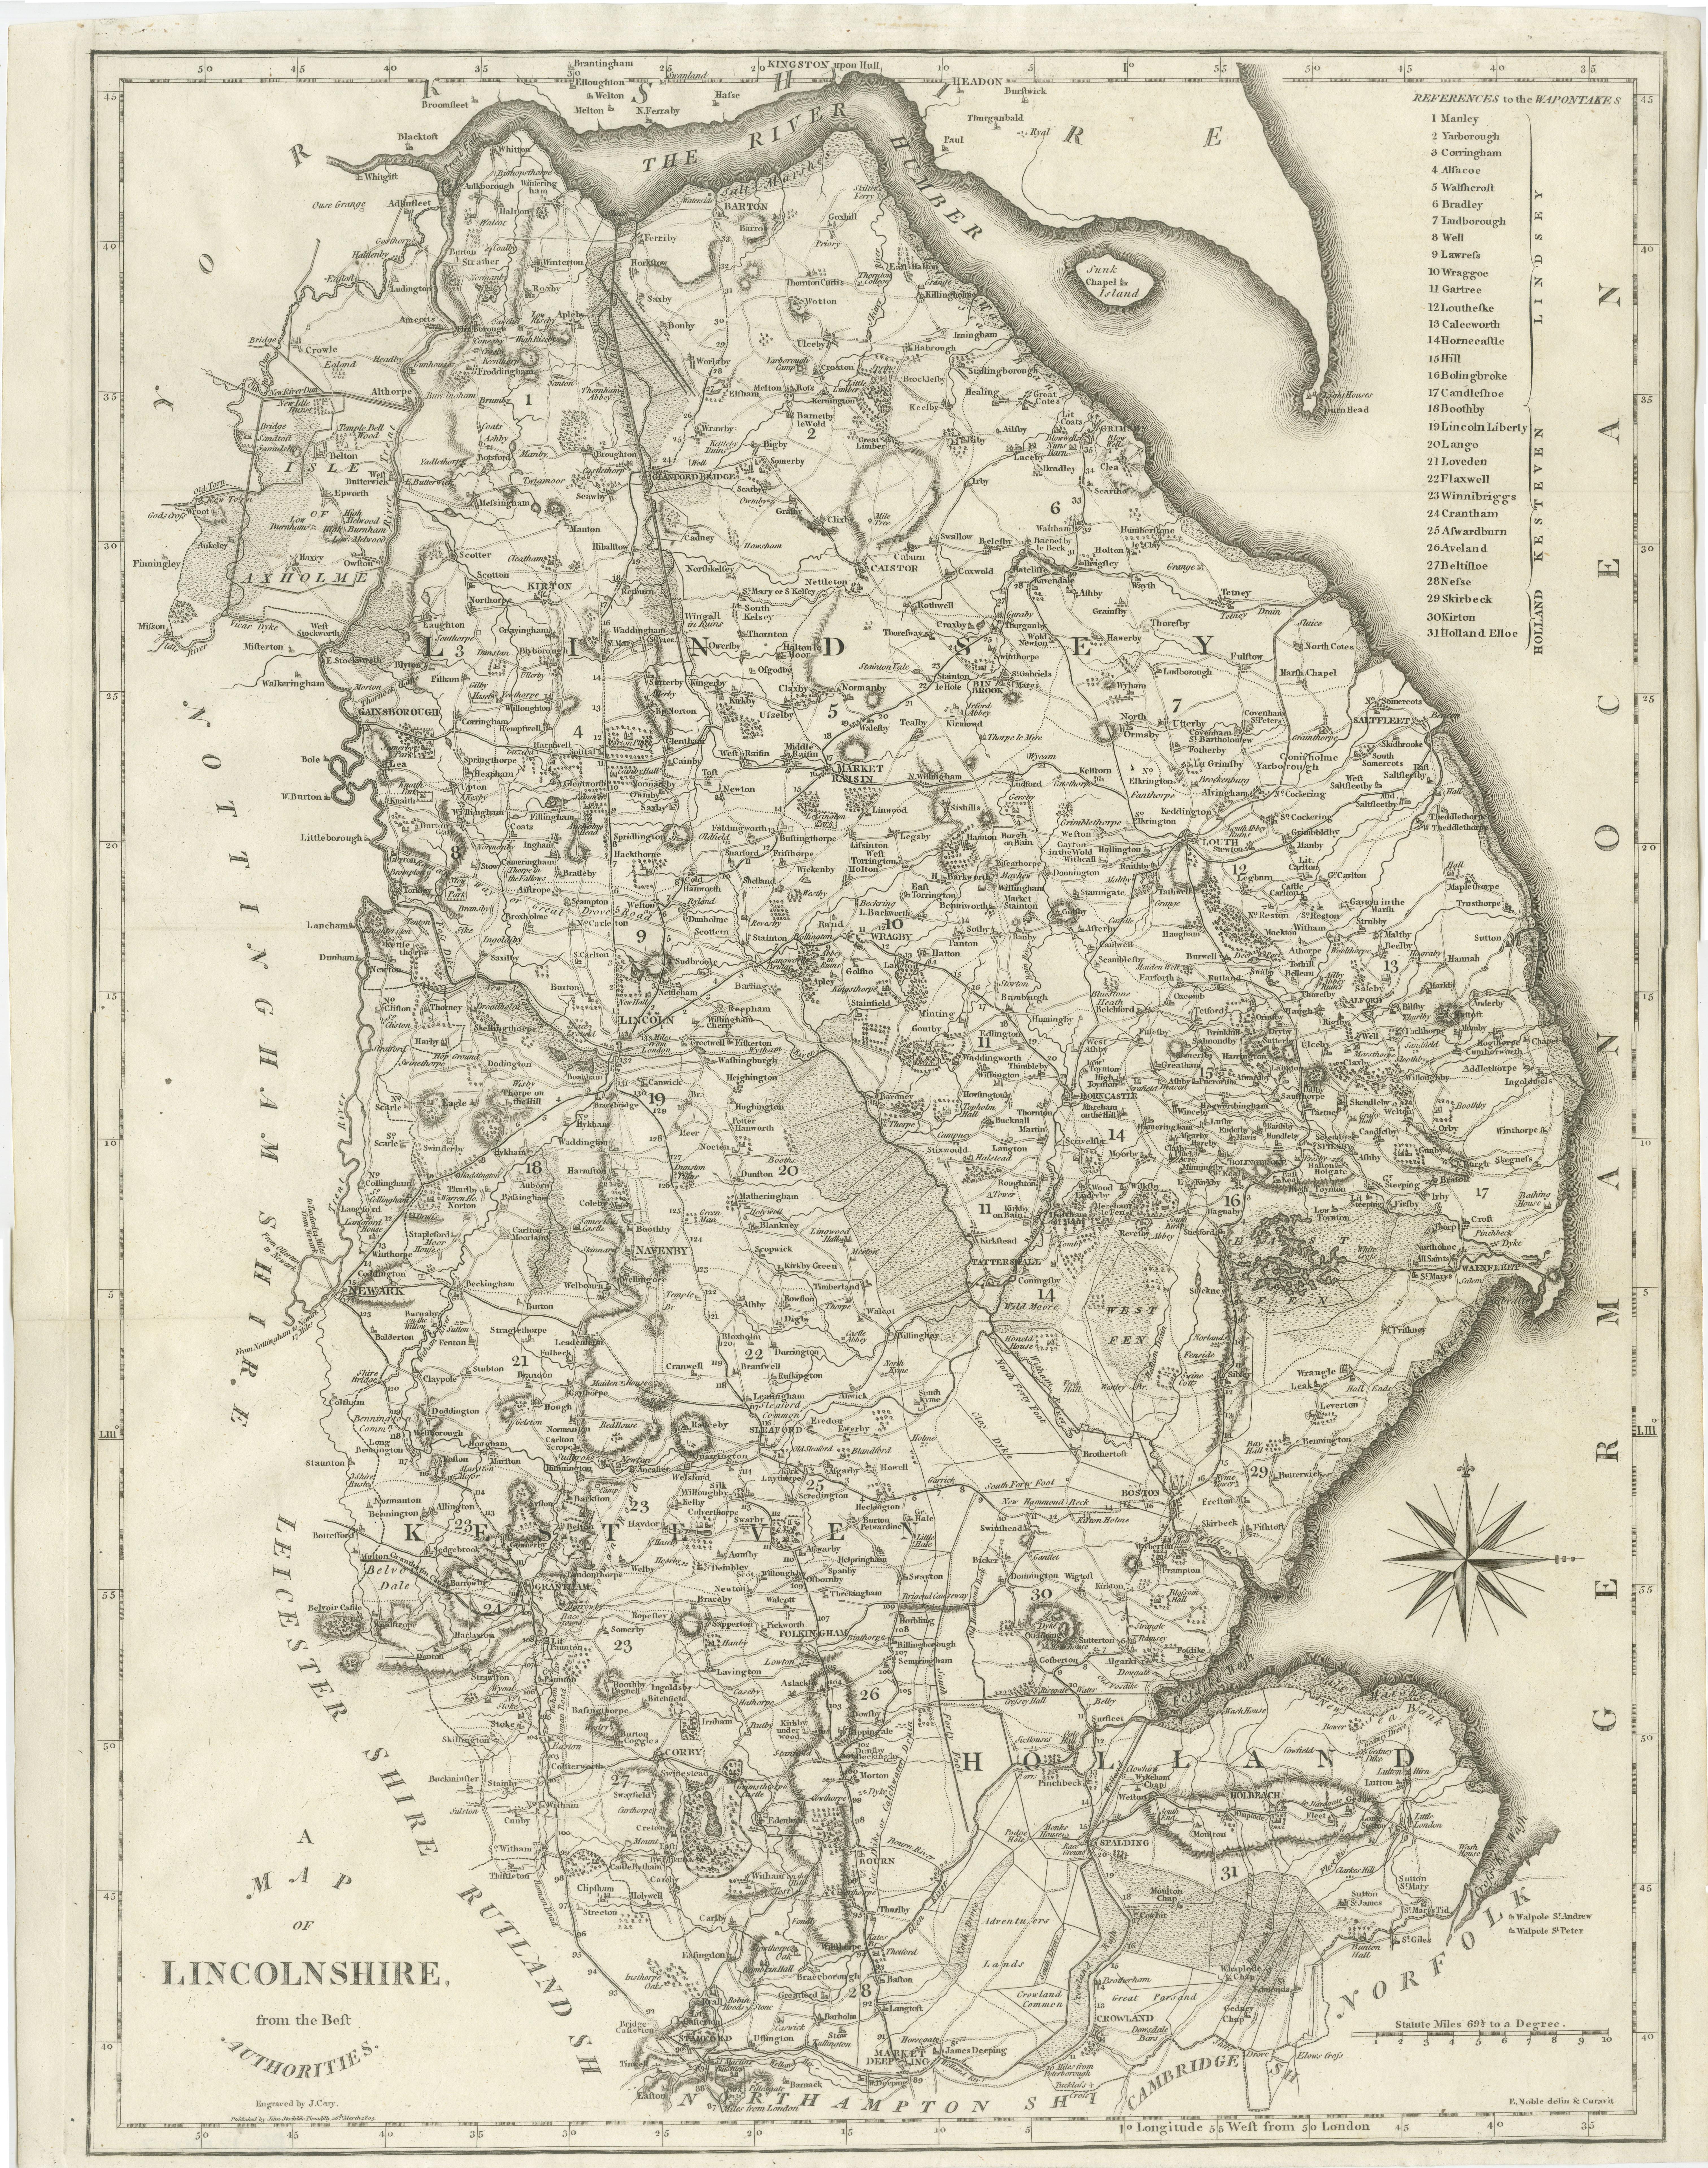 Antique map titled 'A Map of Lincolnshire from the best Authorities'. Original old county map of Lincolnshire, England. Engraved by John Cary. Originates from 'New British Atlas' by John Stockdale, published 1805. 

John Cary (1755-1835) was a